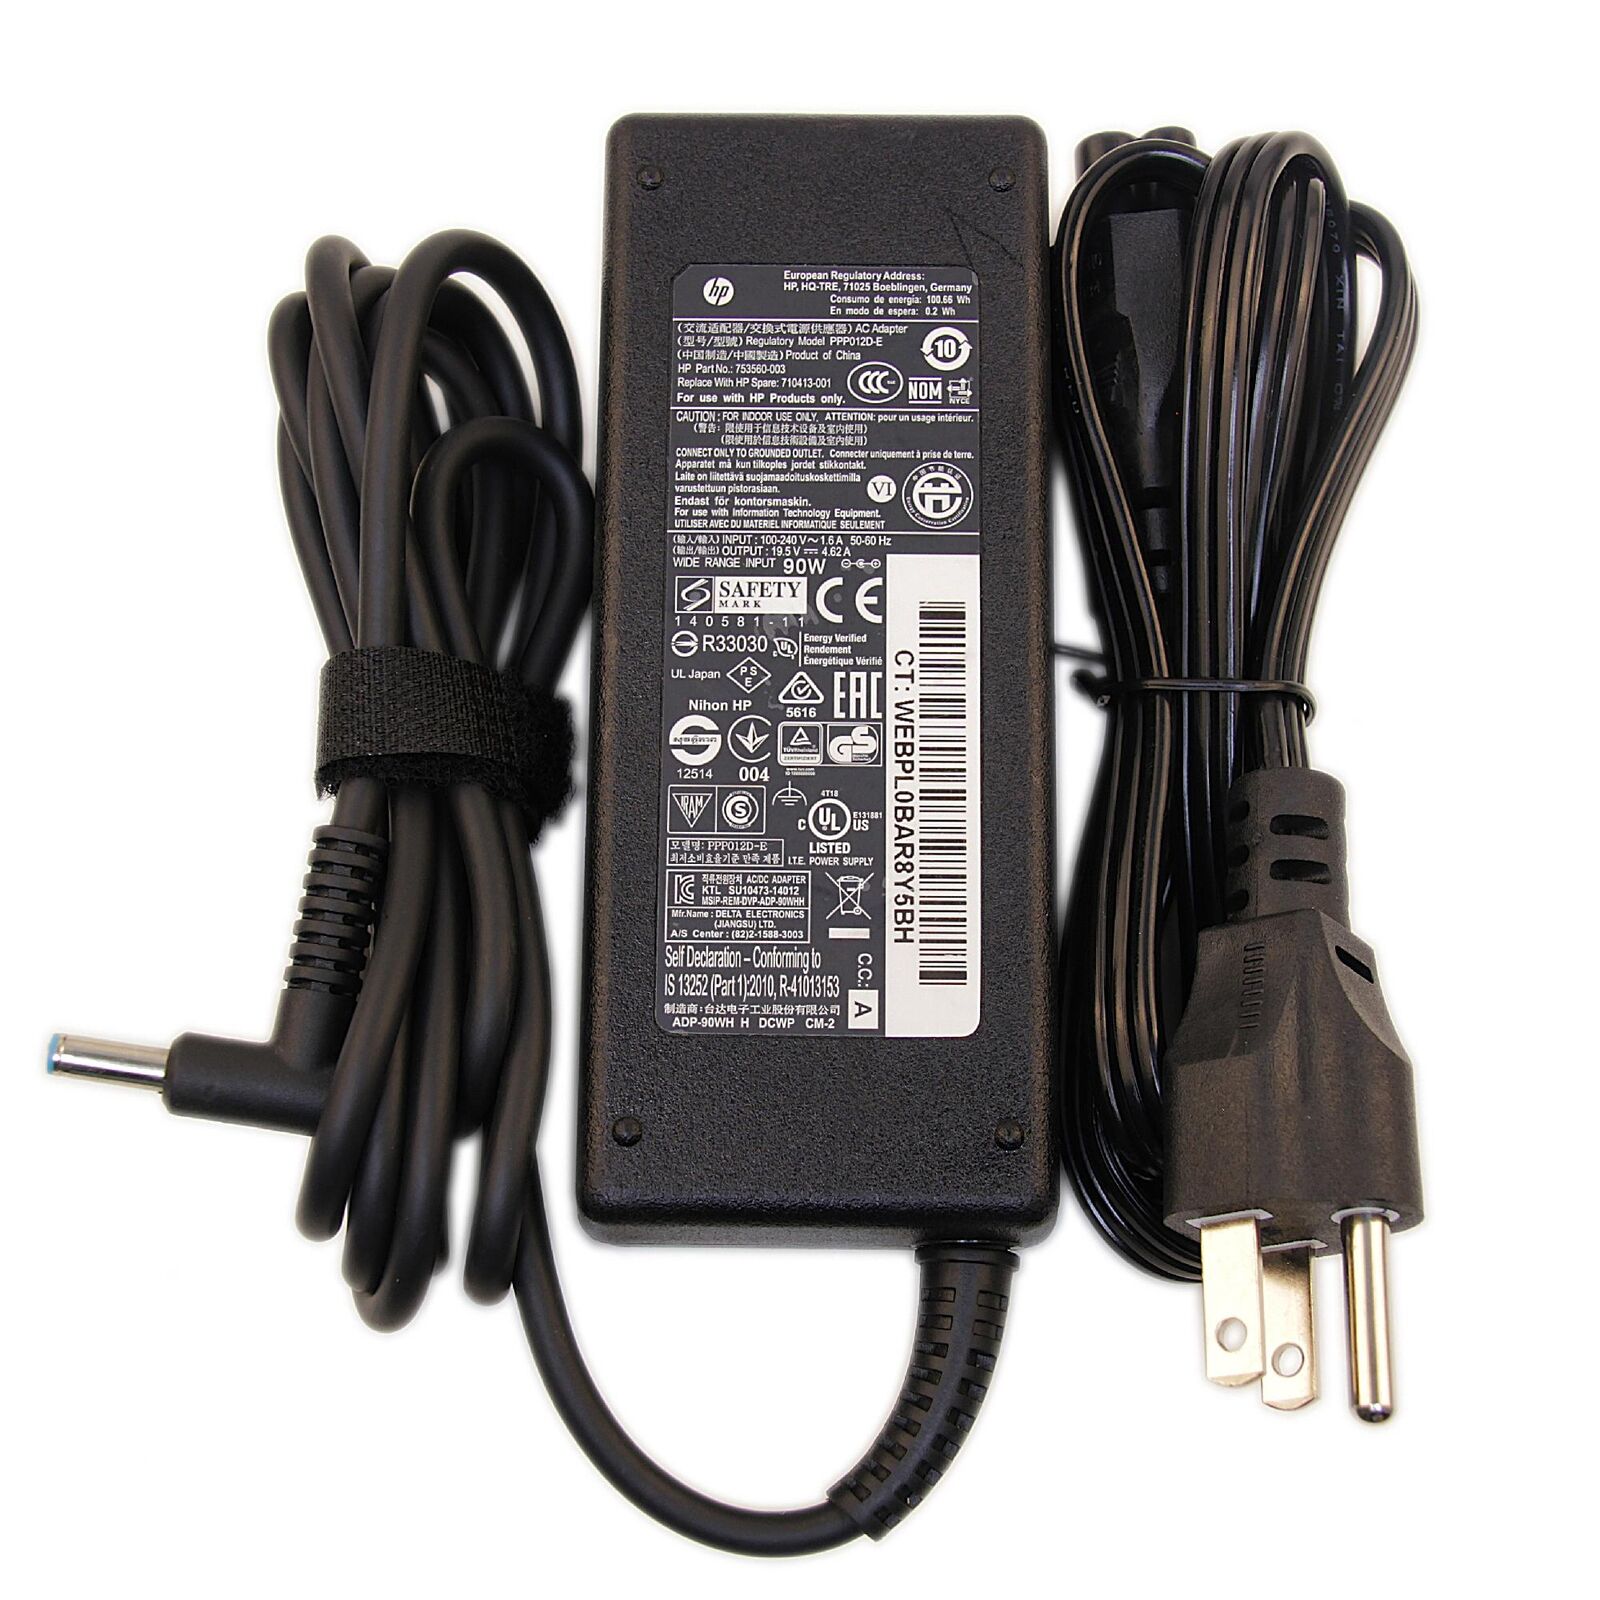 HP PPP012D-S 19.5V 4.62A 90W Genuine Original AC Power Adapter Charger